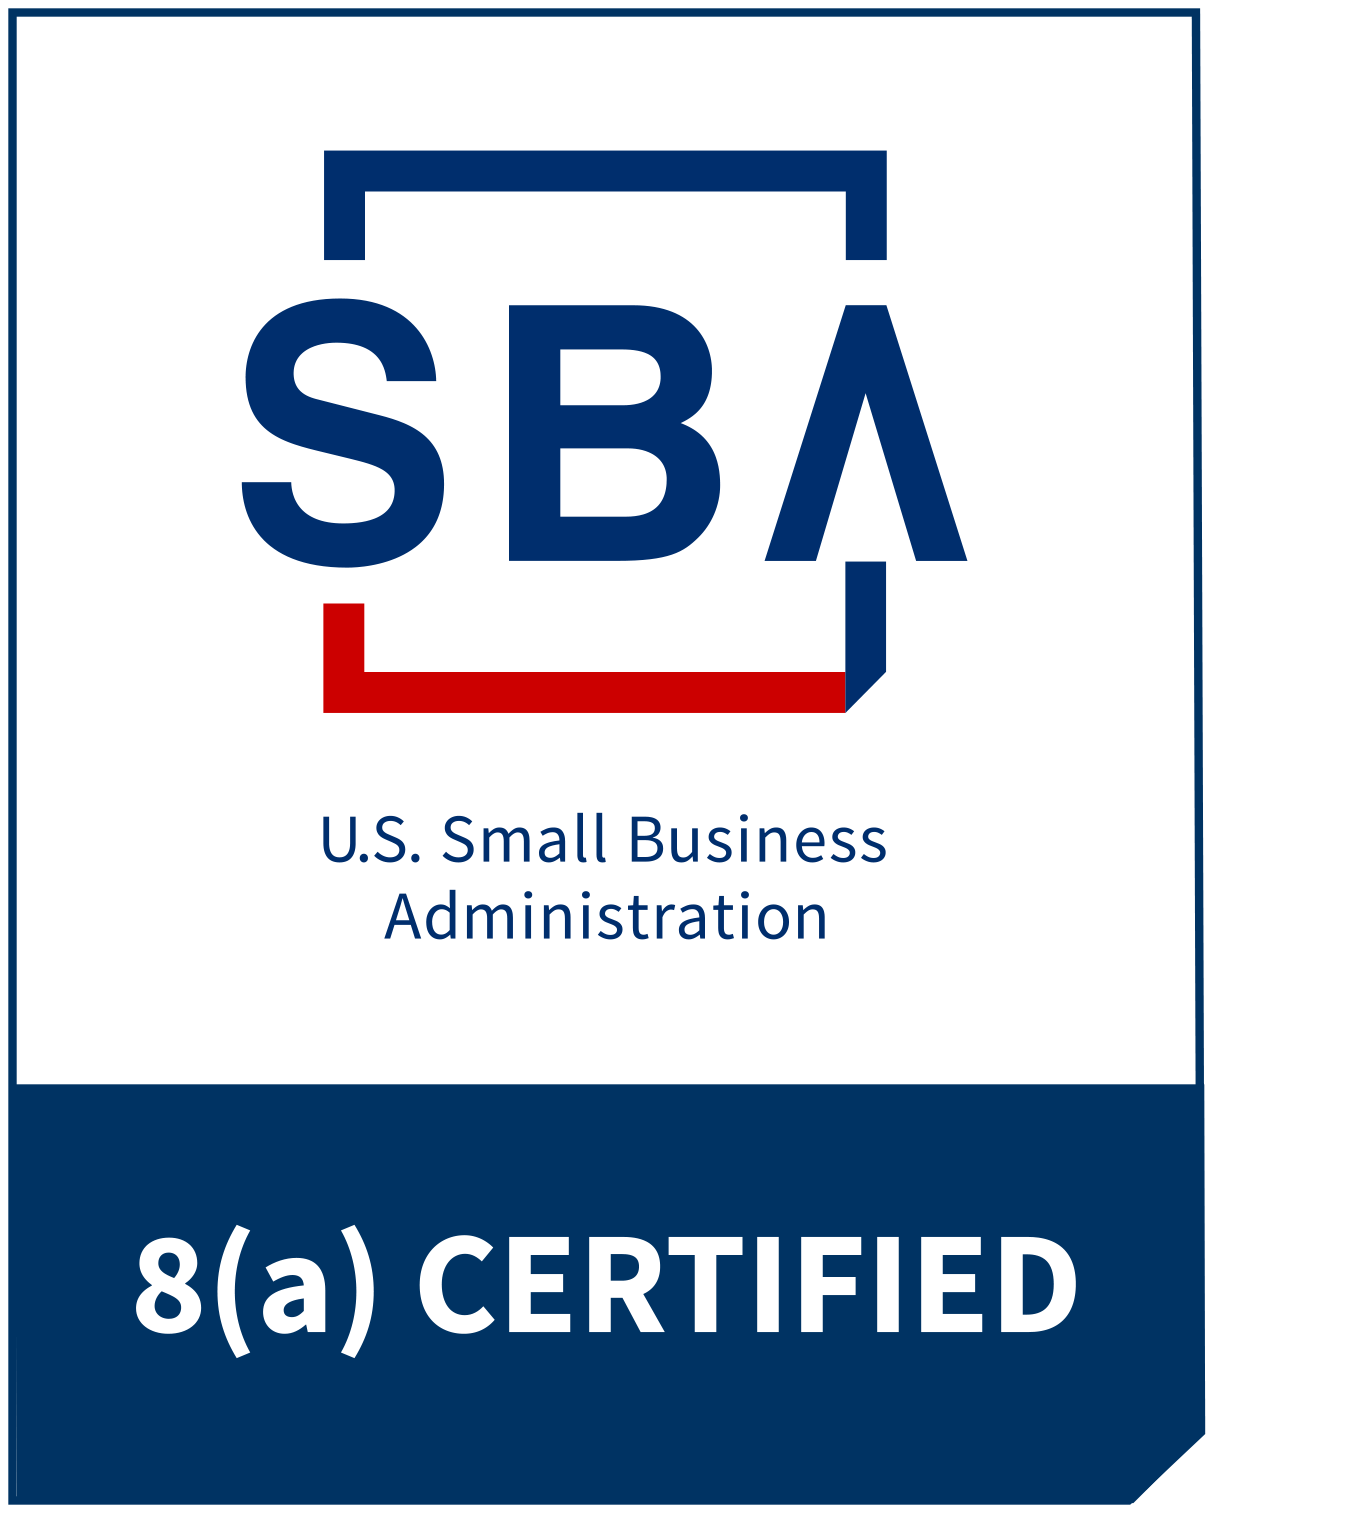 U.S. Small Business Administration 8a Certification